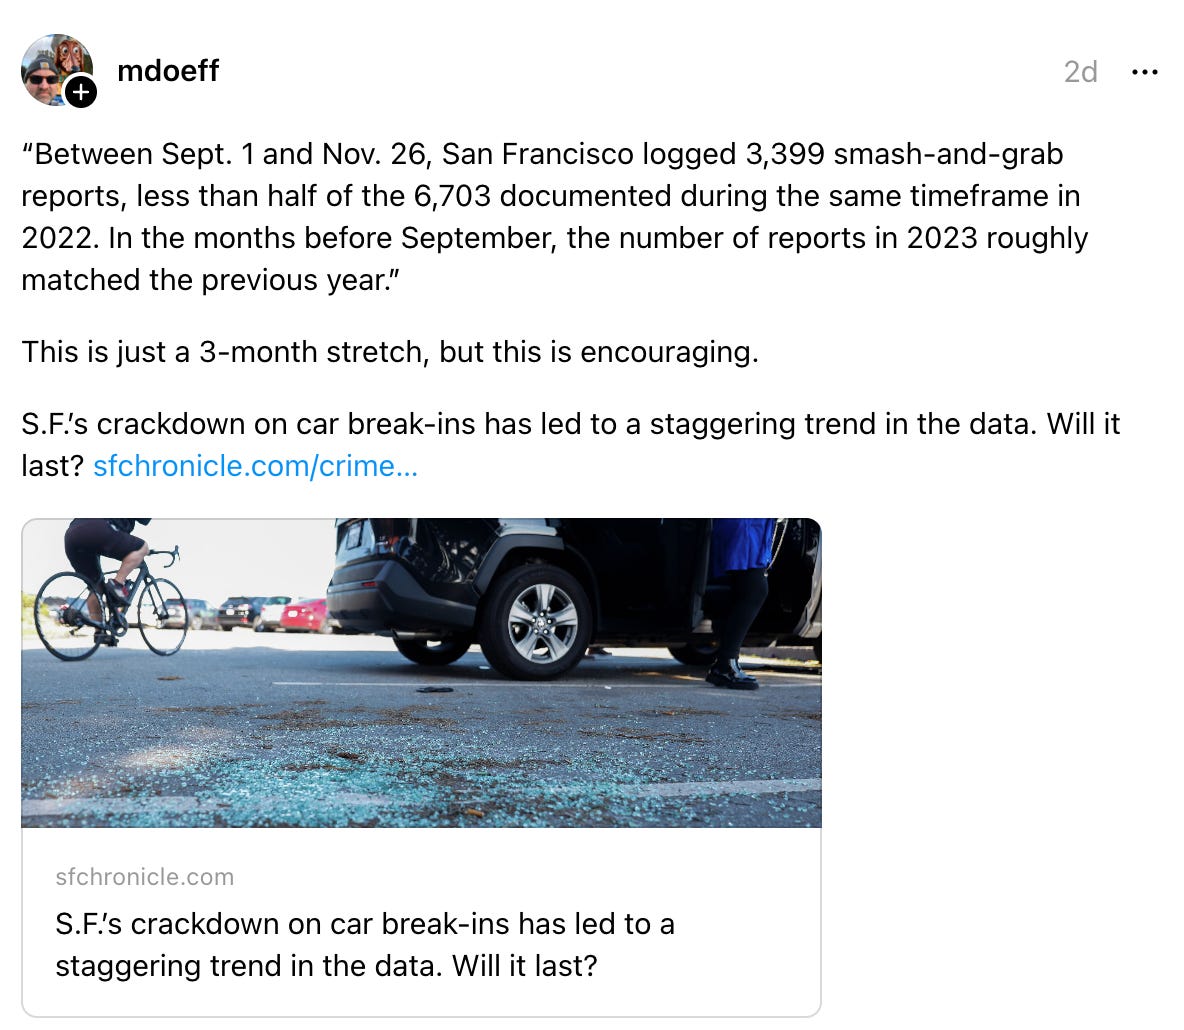 mdoeff 2d “Between Sept. 1 and Nov. 26, San Francisco logged 3,399 smash-and-grab reports, less than half of the 6,703 documented during the same timeframe in 2022. In the months before September, the number of reports in 2023 roughly matched the previous year.” This is just a 3-month stretch, but this is encouraging. S.F.’s crackdown on car break-ins has led to a staggering trend in the data. Will it last? sfchronicle.com/crime… S.F.’s crackdown on car break-ins has led to a staggering trend in the data. Will it last? sfchronicle.com S.F.’s crackdown on car break-ins has led to a staggering trend in the data. Will it last?